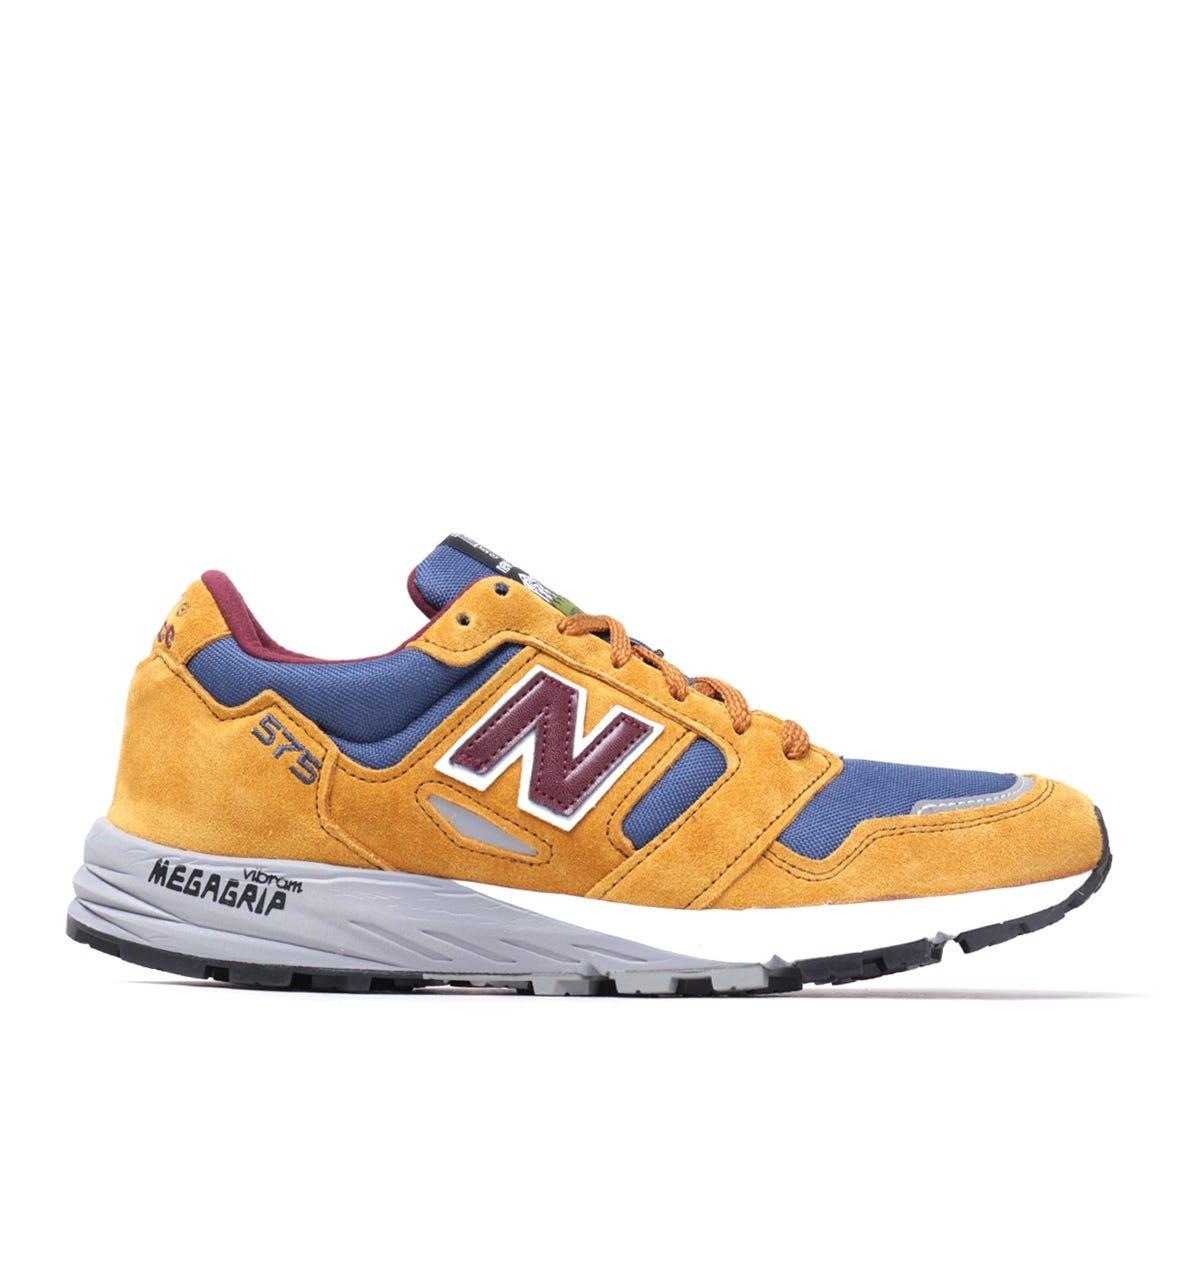 New Balance Trail 575 Suede Mustard & Blue Mesh Trainers for ...